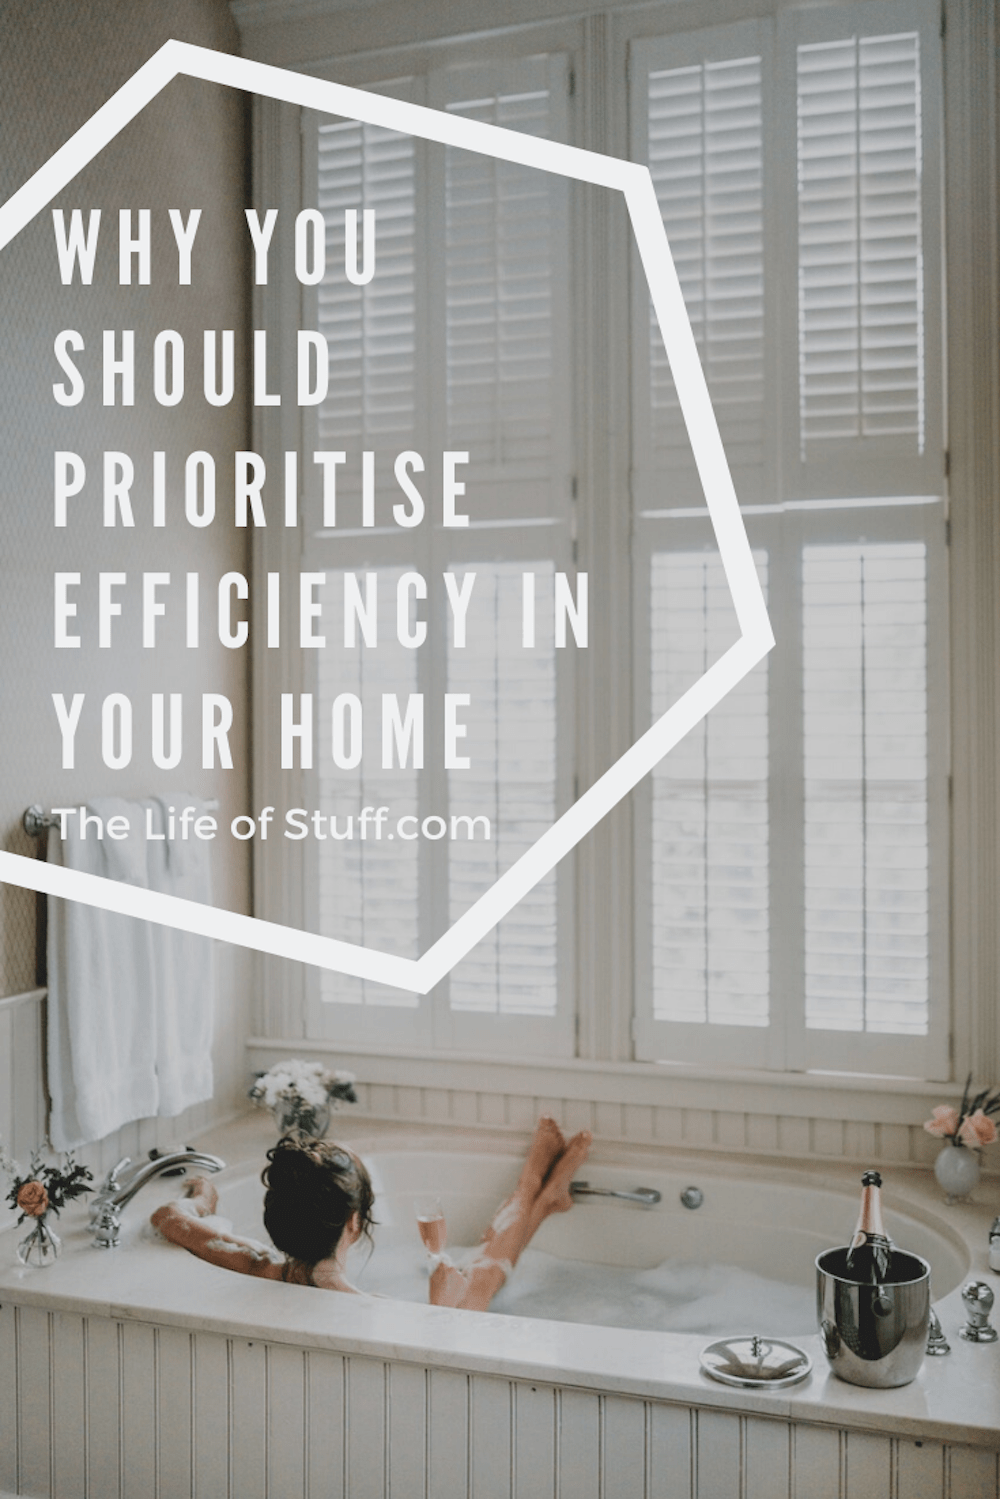 Why You Should Prioritise Efficiency In Your Home - The Life of Stuff